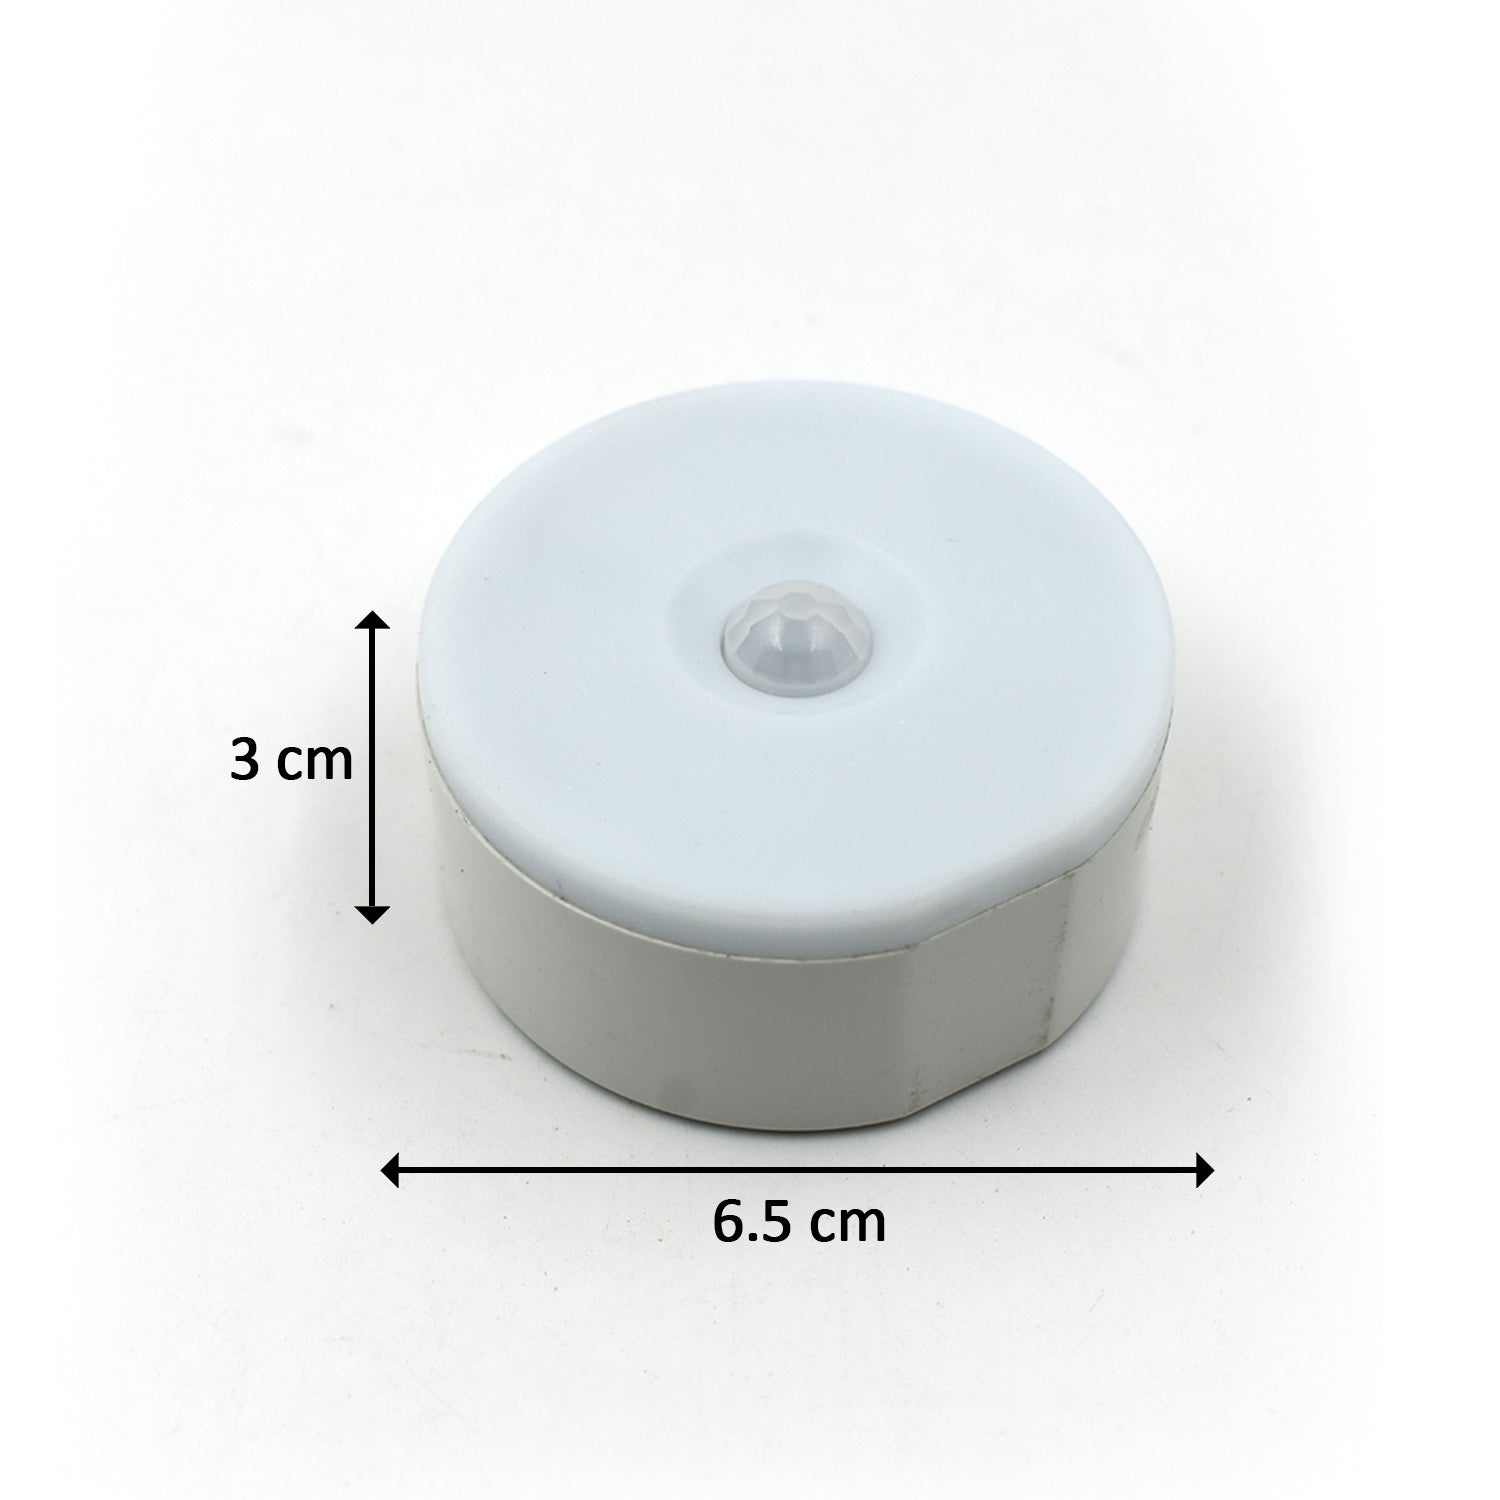 1656A Magnetic Sensor Light used in all kinds of household and official places for night and day lightning purposes through sensor connectivity. freeshipping - DeoDap